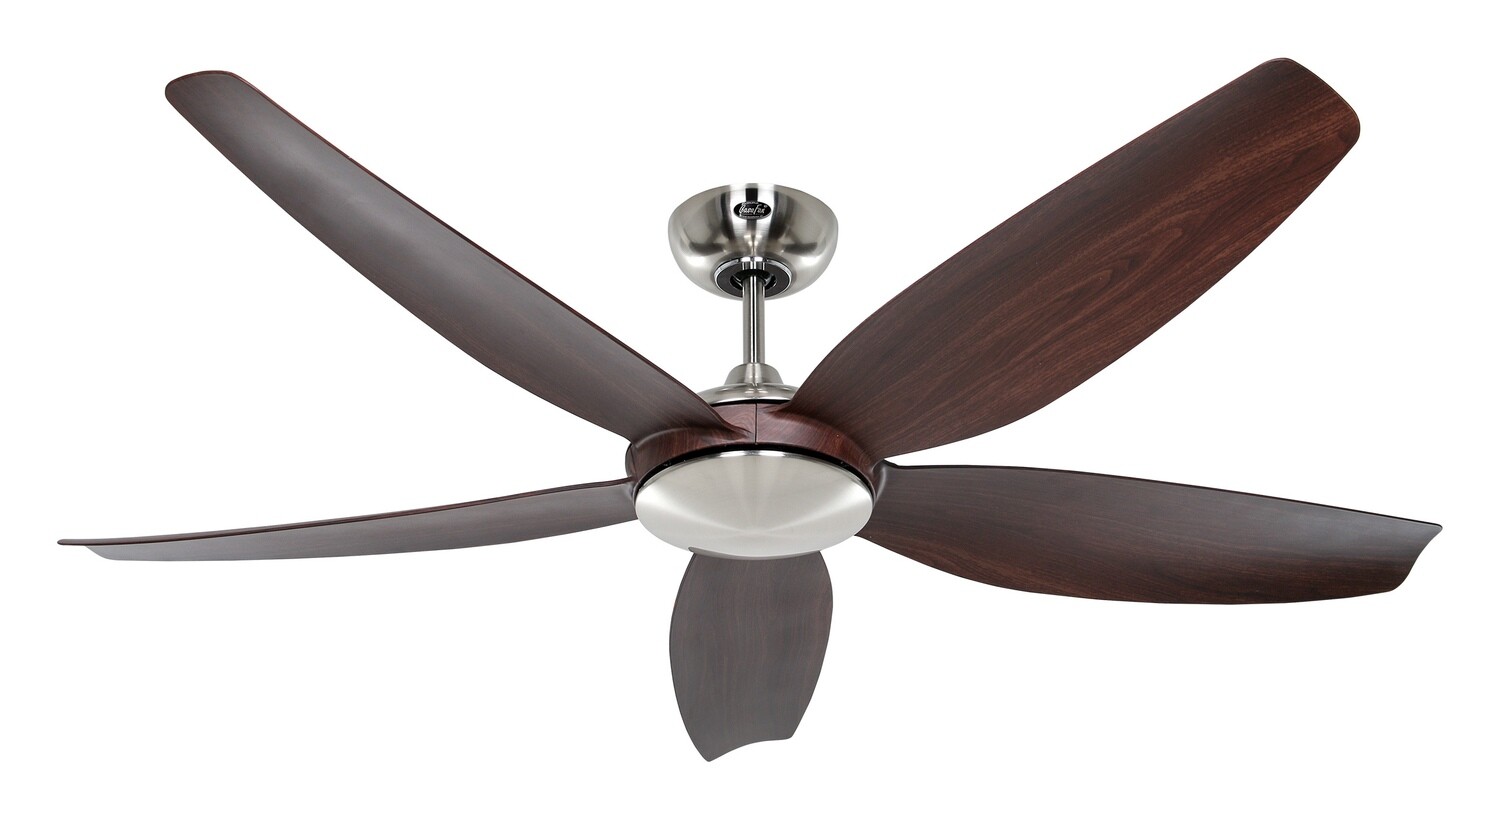 Eco Volare 142 BN-NB ceiling fan by CASAFAN Ø142 with remote control included